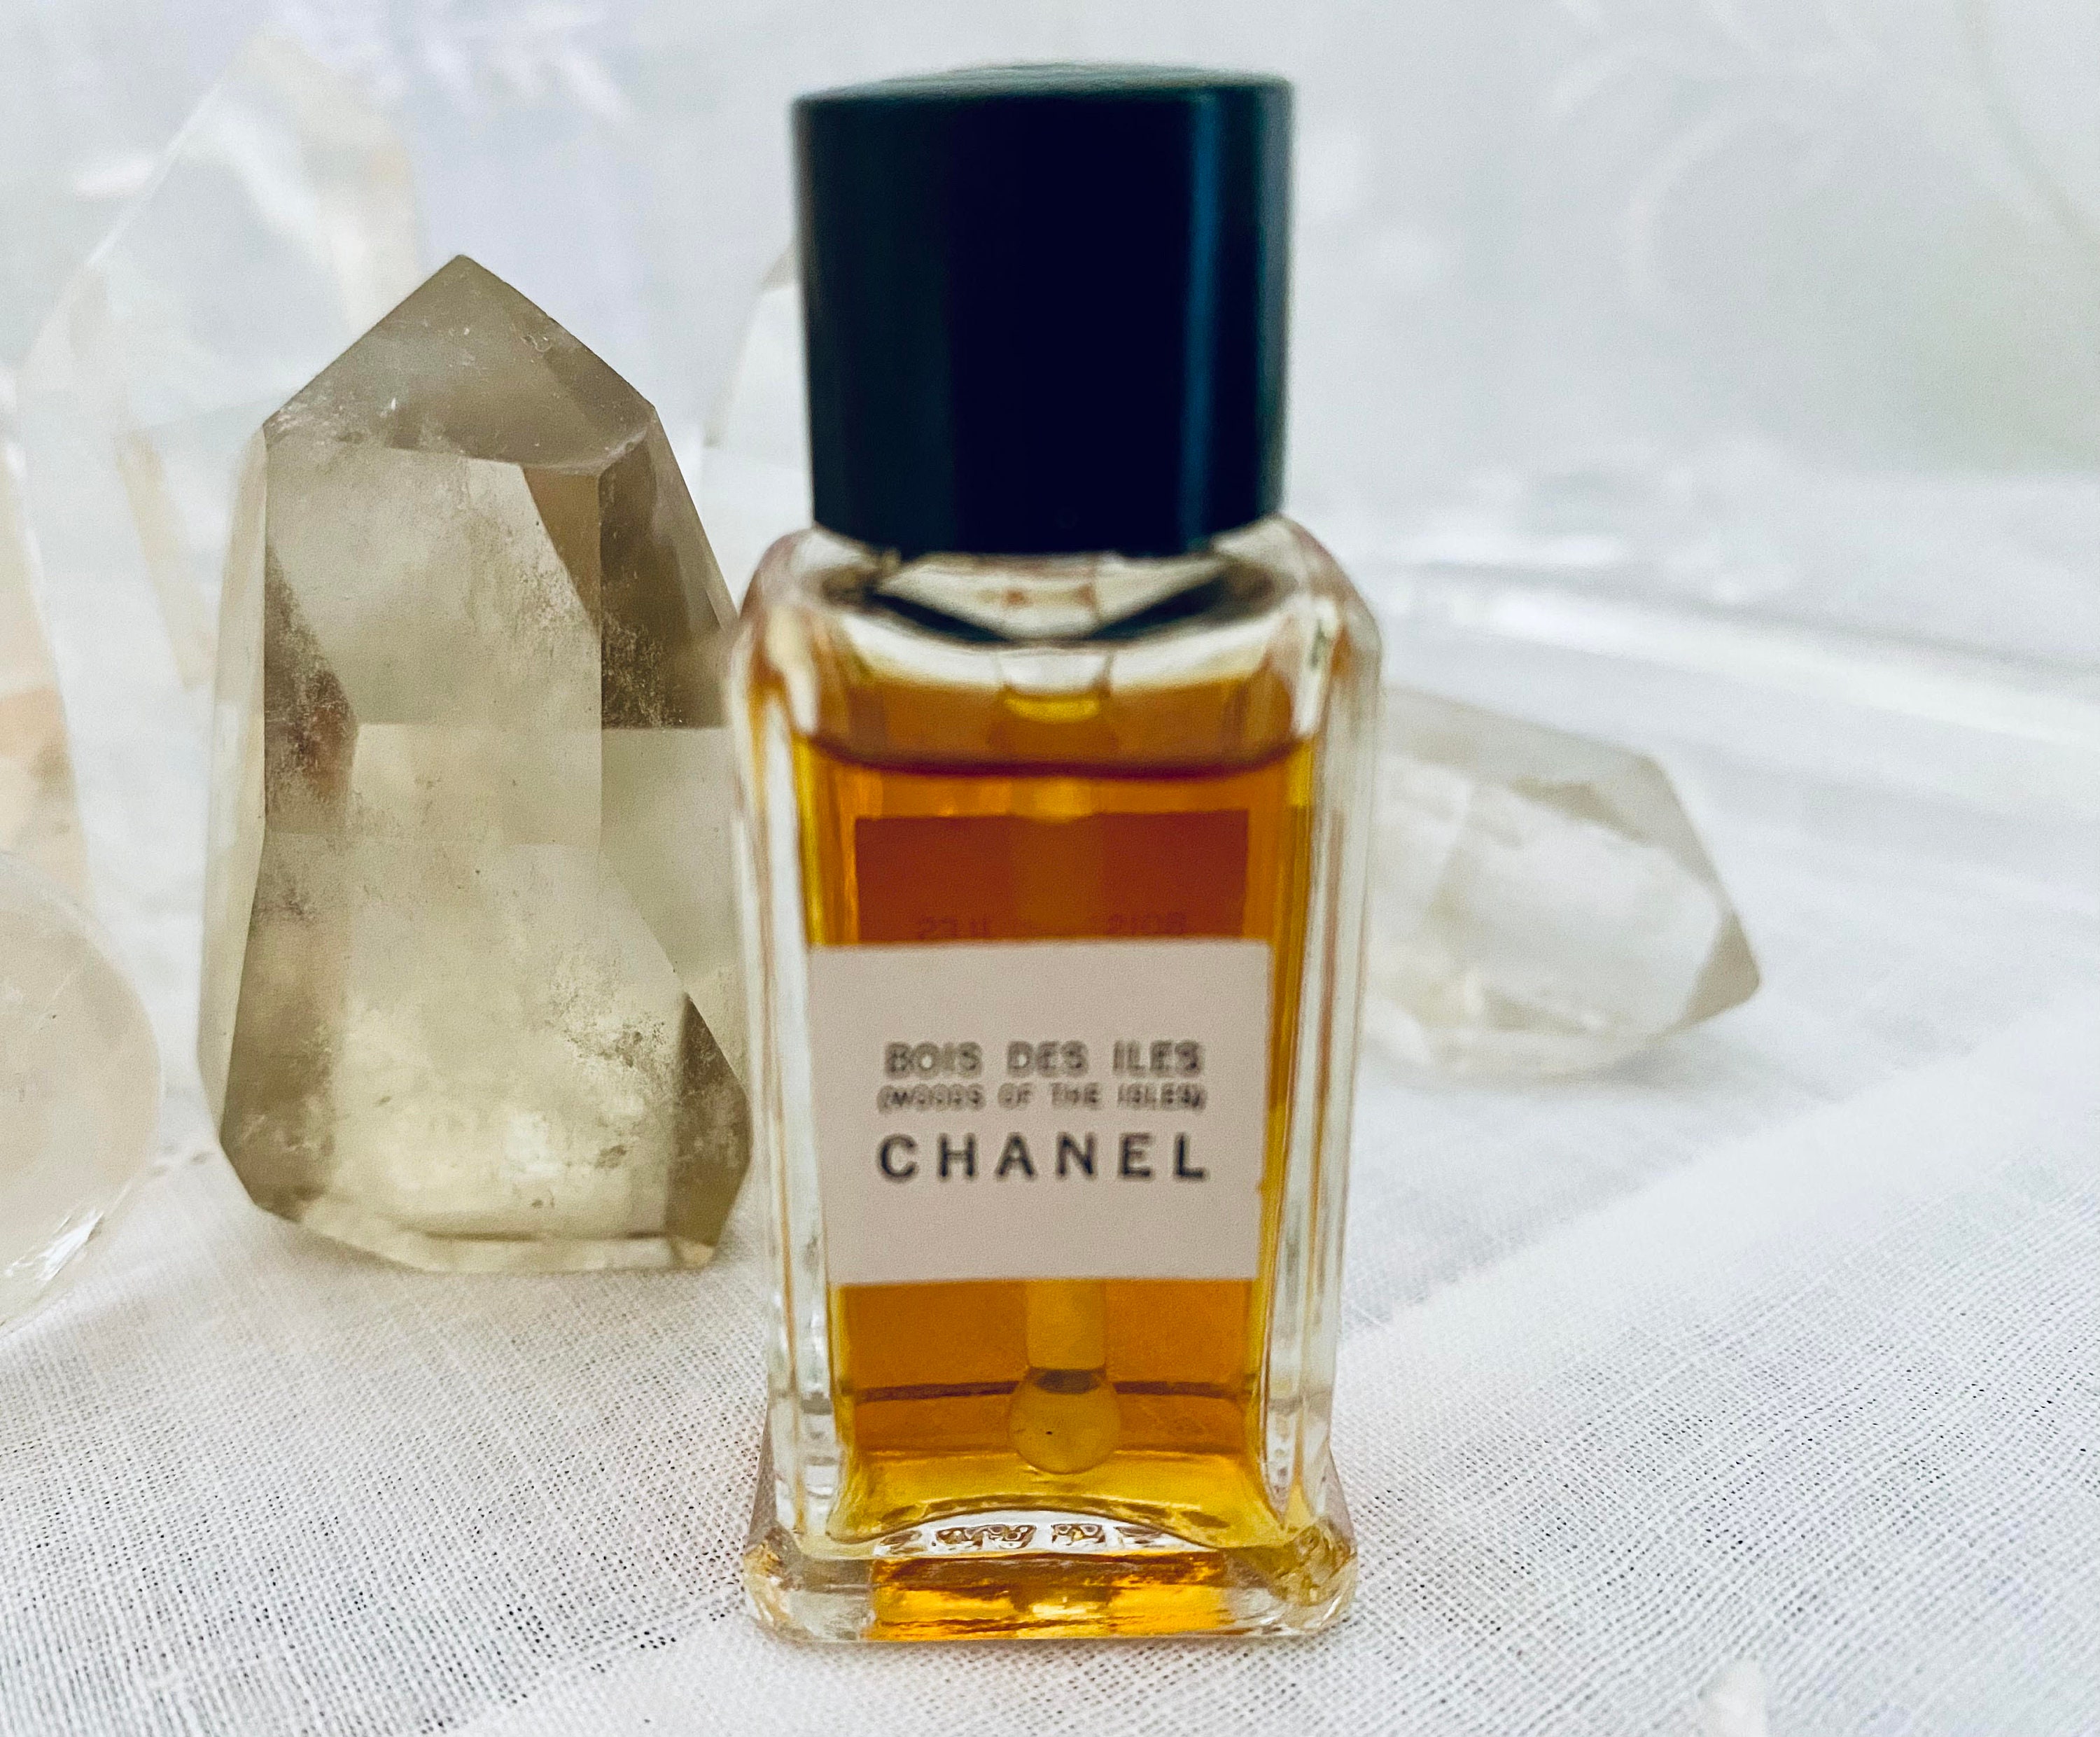 Chanel Bois Des Iles 'woods of the Isles' 7.5 Ml. -  Israel